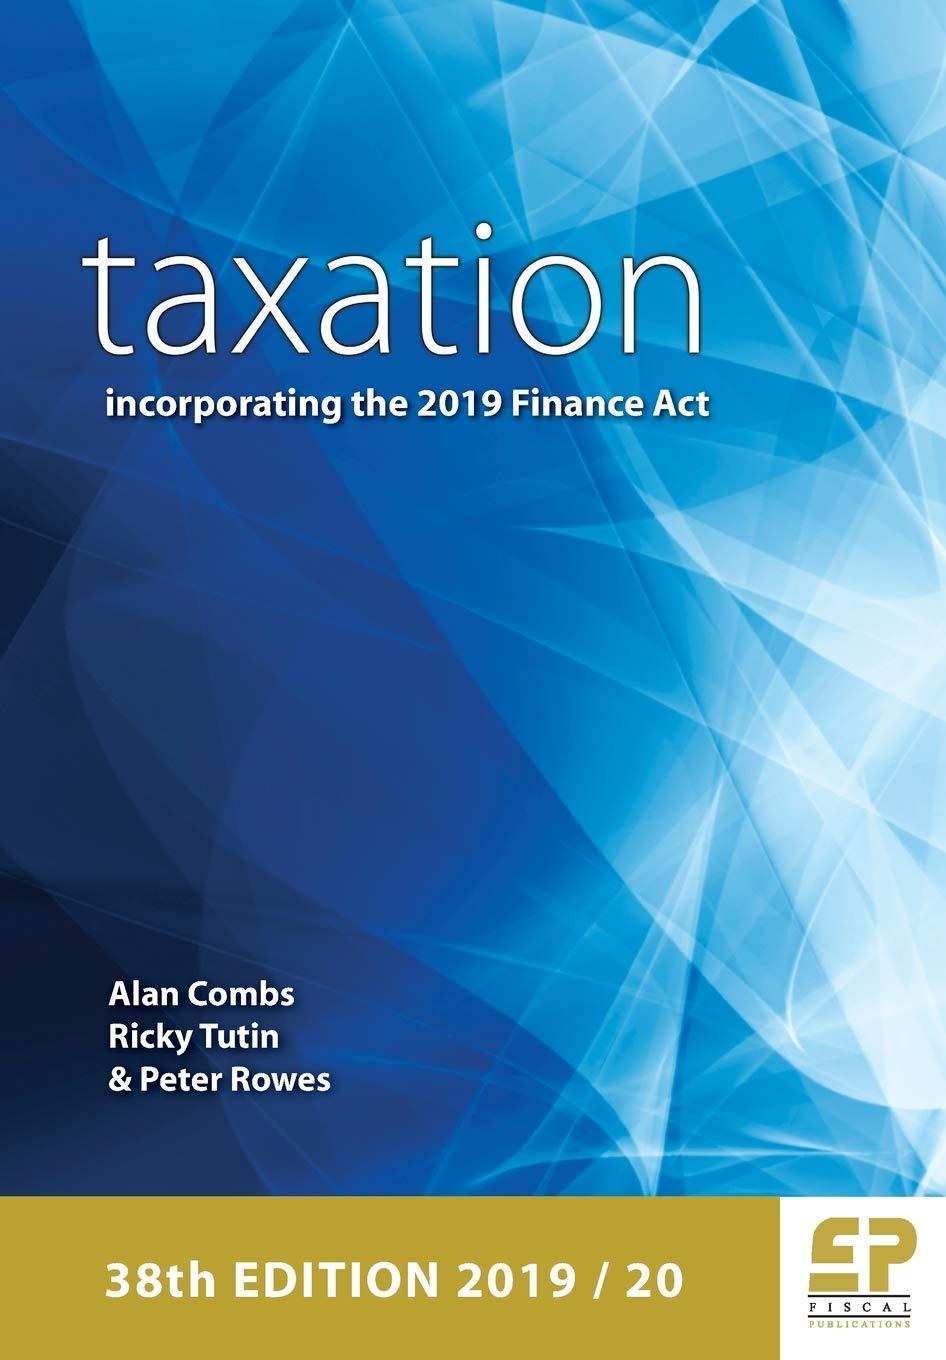 taxation incorporating the 2019 finance act 38th edition alan combs, ricky tutin, peter rowes 1906201536,